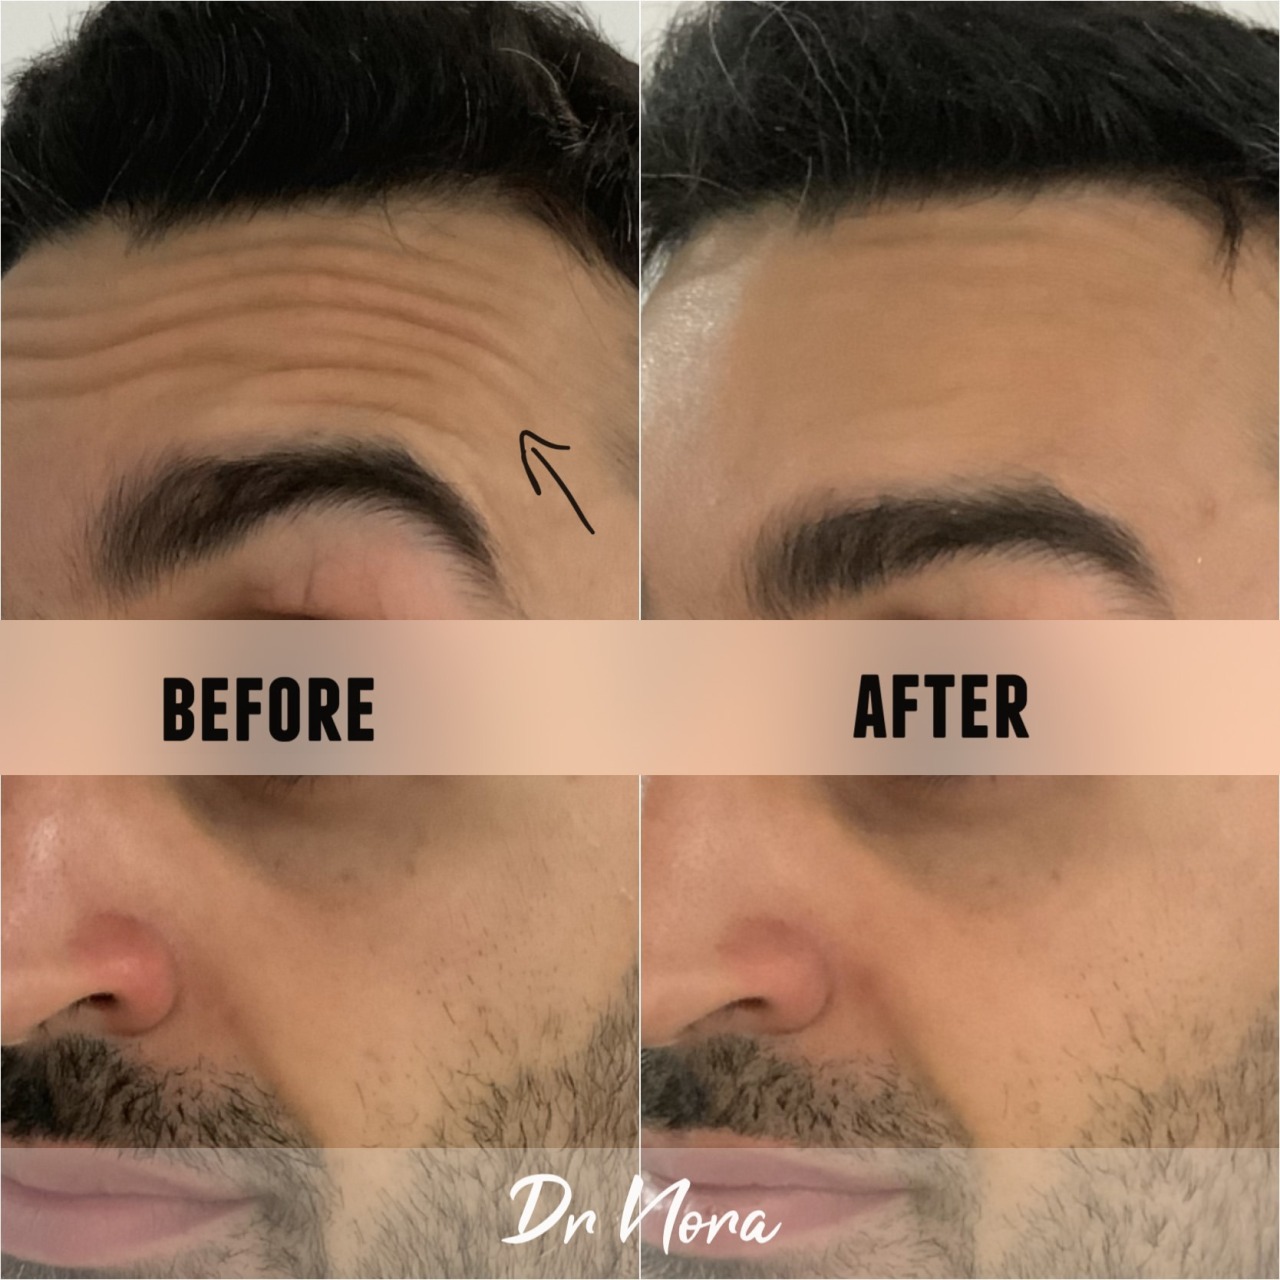 Anti-wrinkle treatment of the forehead 😲Anti-wrinkle therapy is a way to reduce the appearance of strong and deep lines. Treatment time is 15 minutes, optimal results are seen at 2 weeks and lasts up to 3-5 months.
If you have any questions or would...